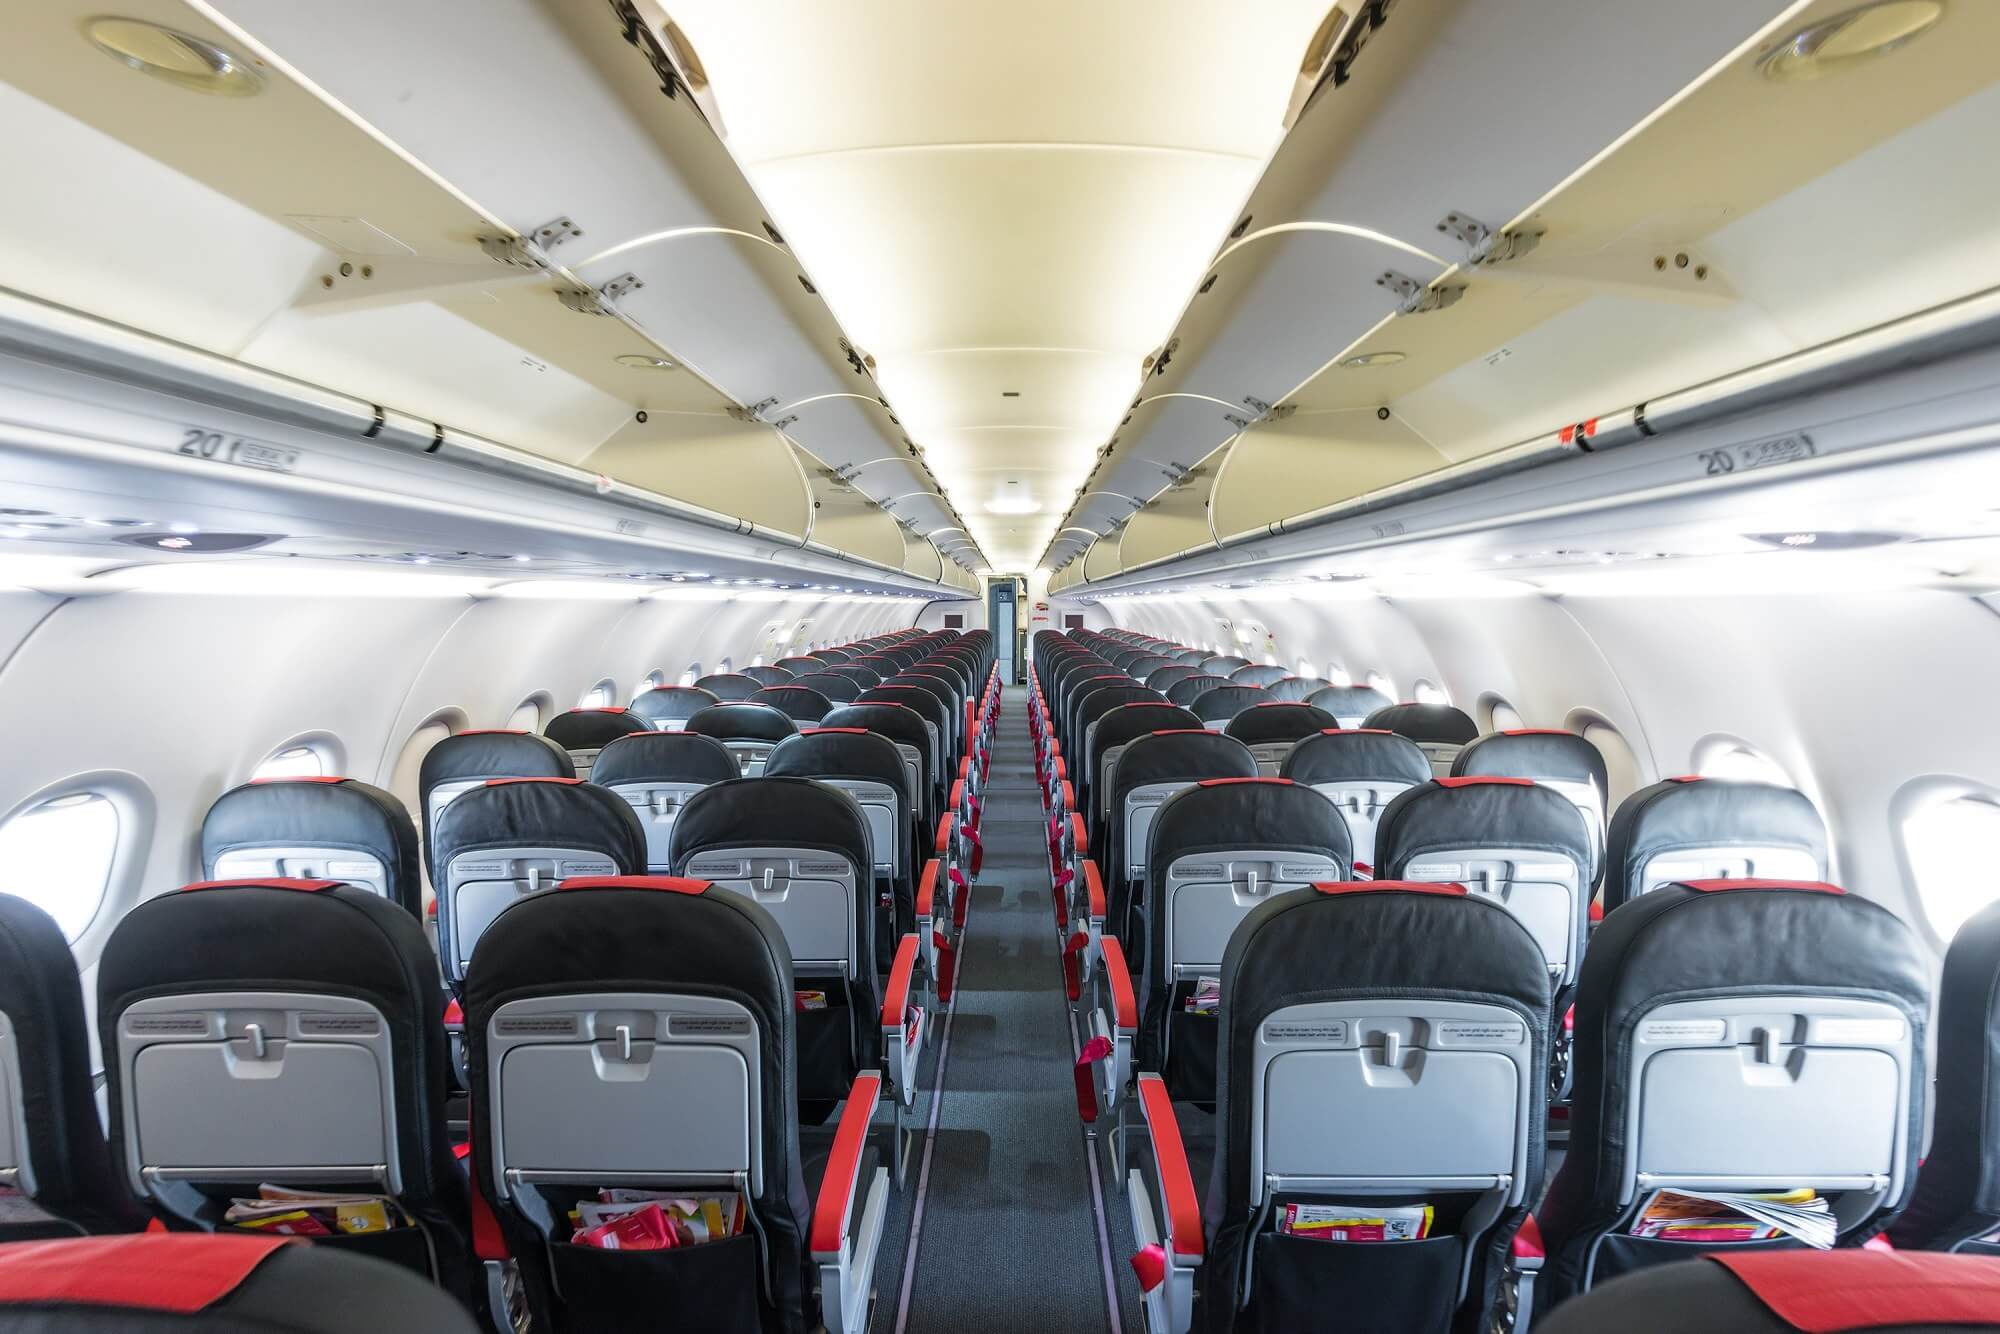 Airlines are flying empty planes because of the coronavirus